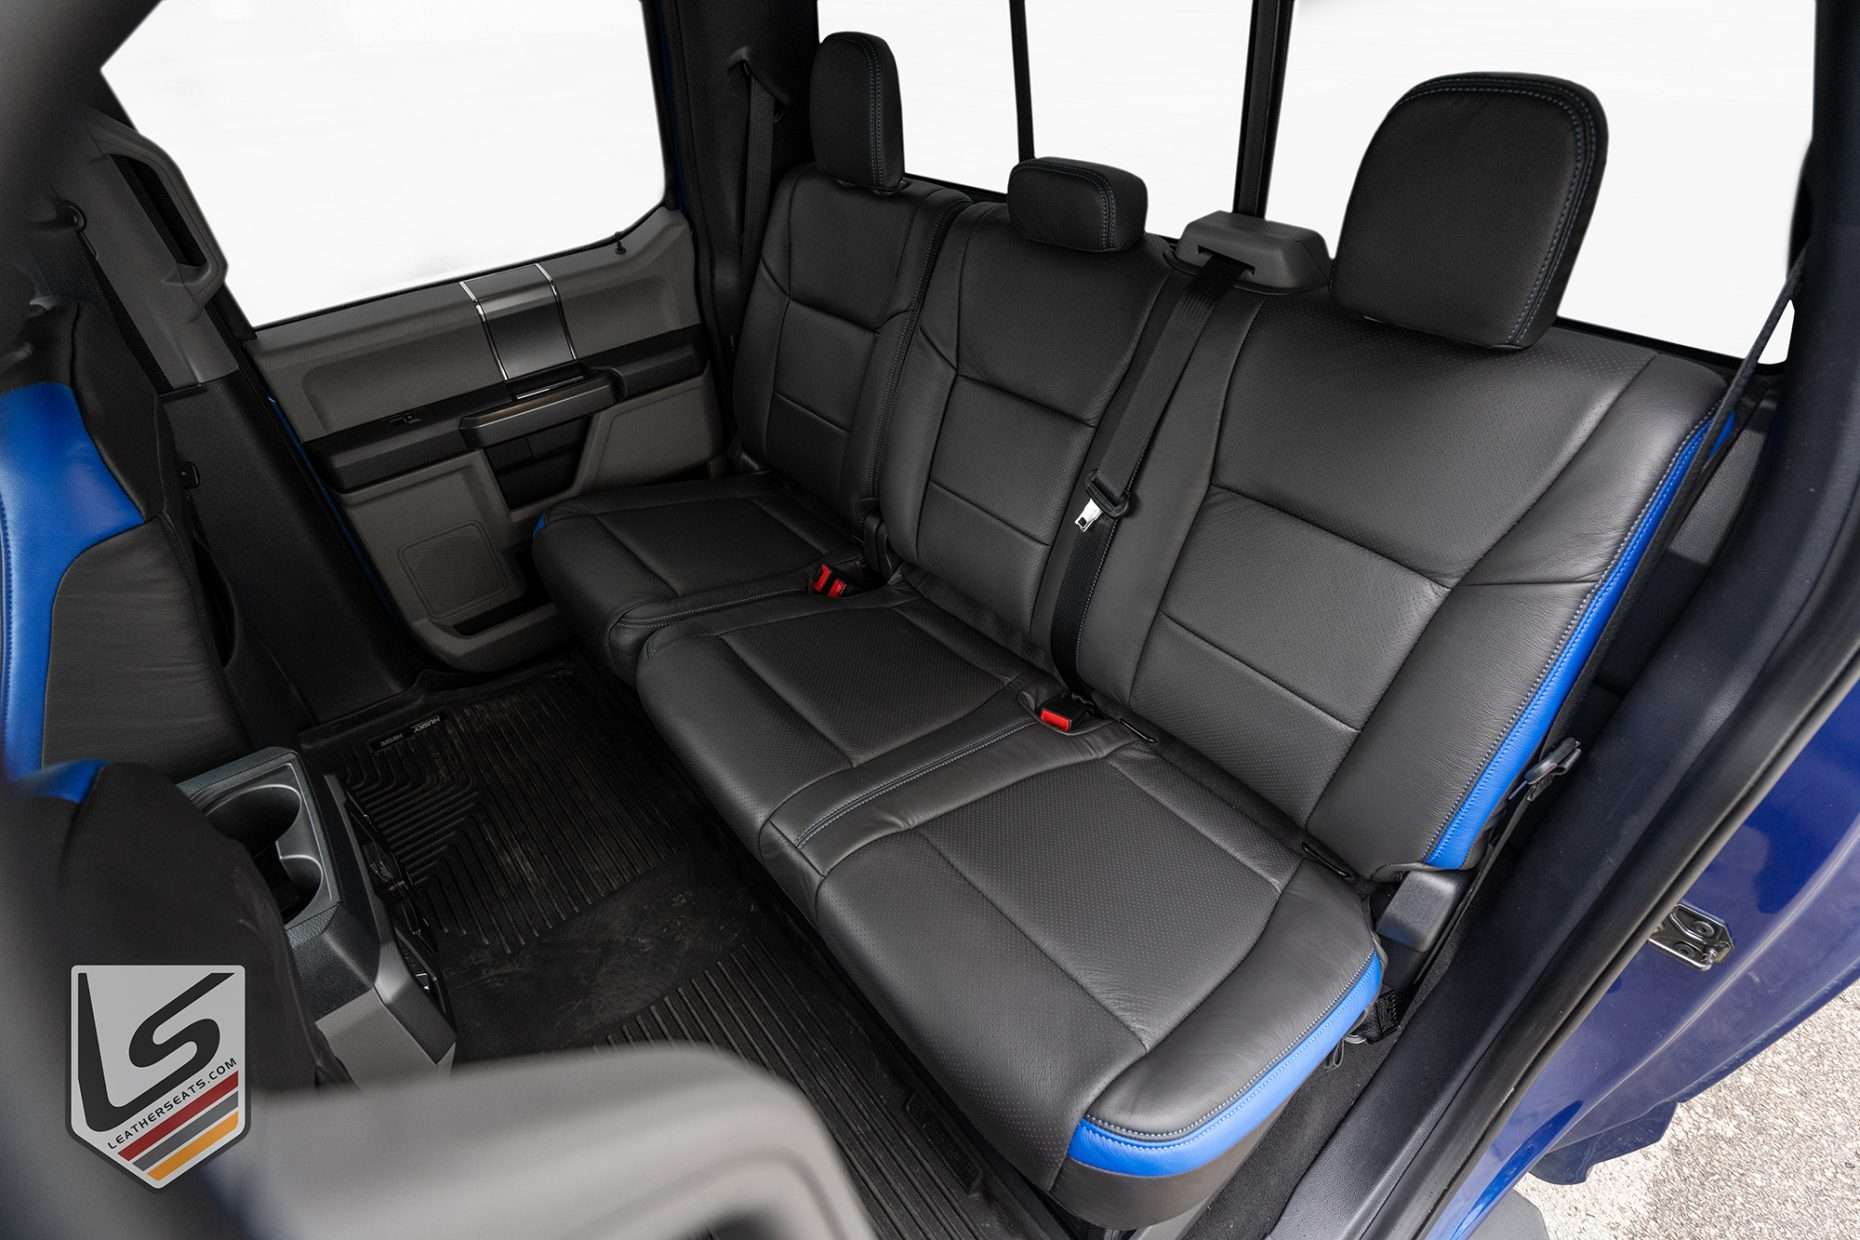 Installed Ford SuperDuty Leather Seats - Rear seats from driver side